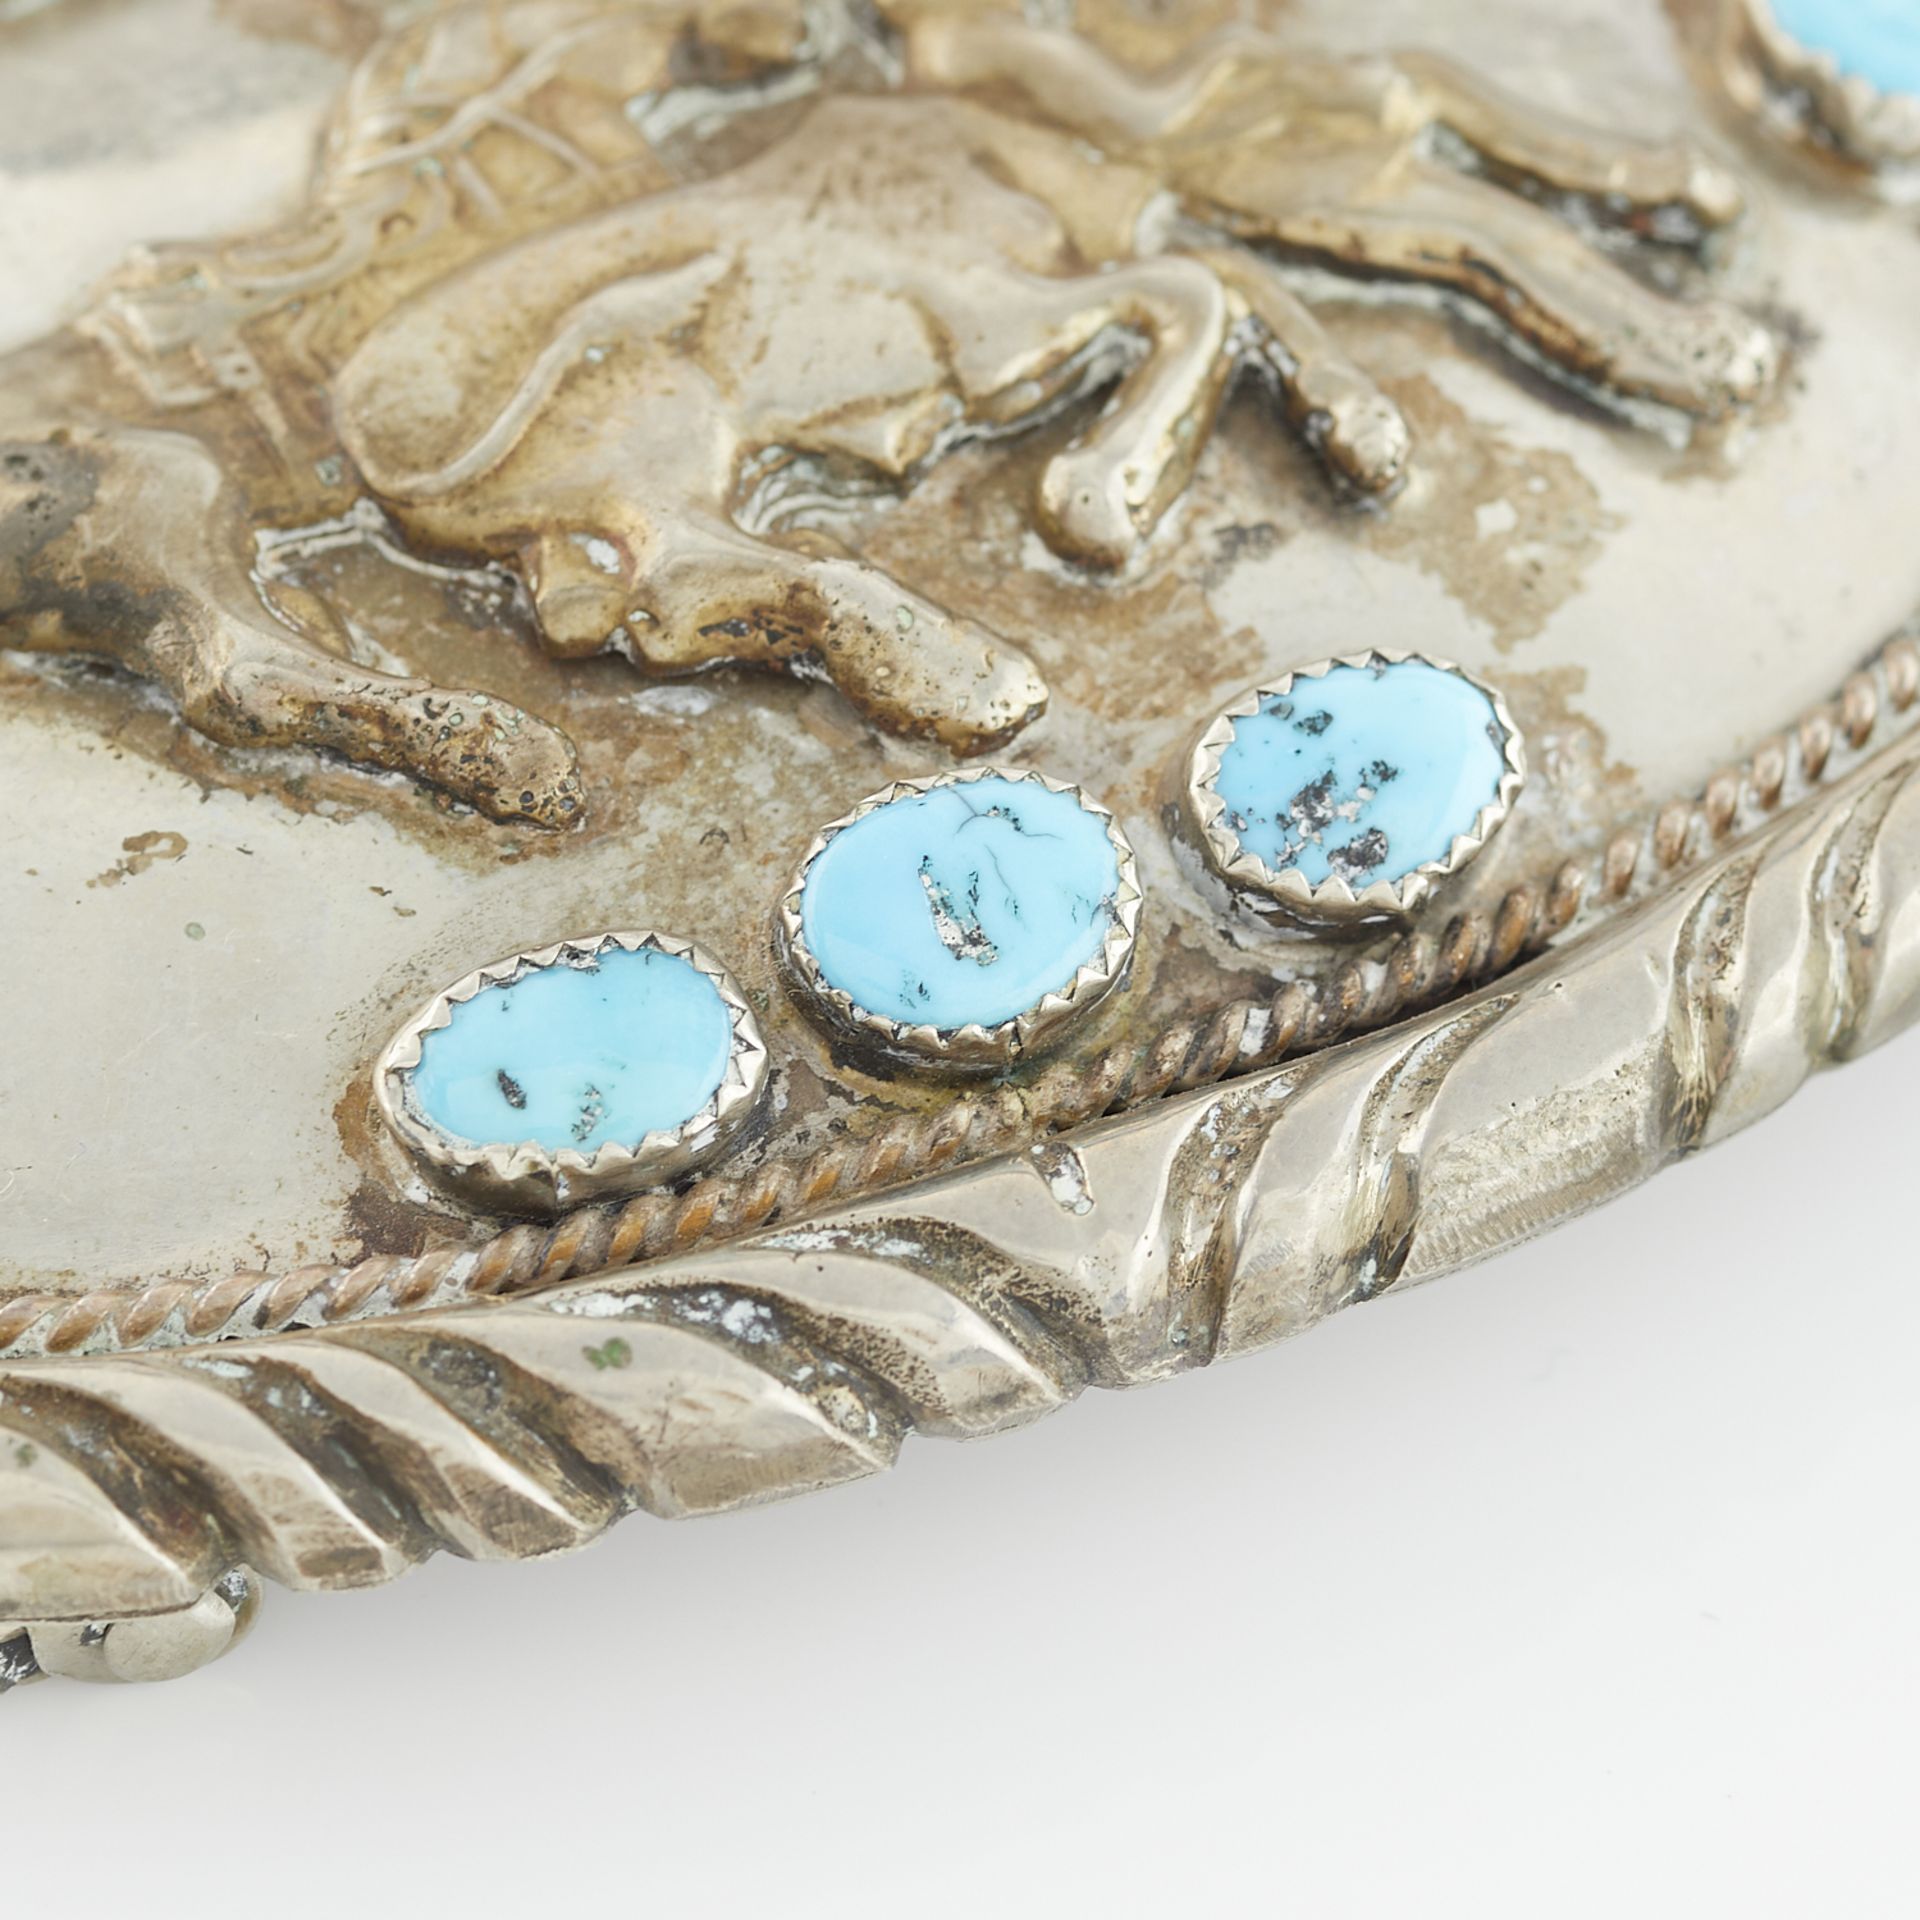 Rodeo Belt Buckle with Turquoise - Image 6 of 6